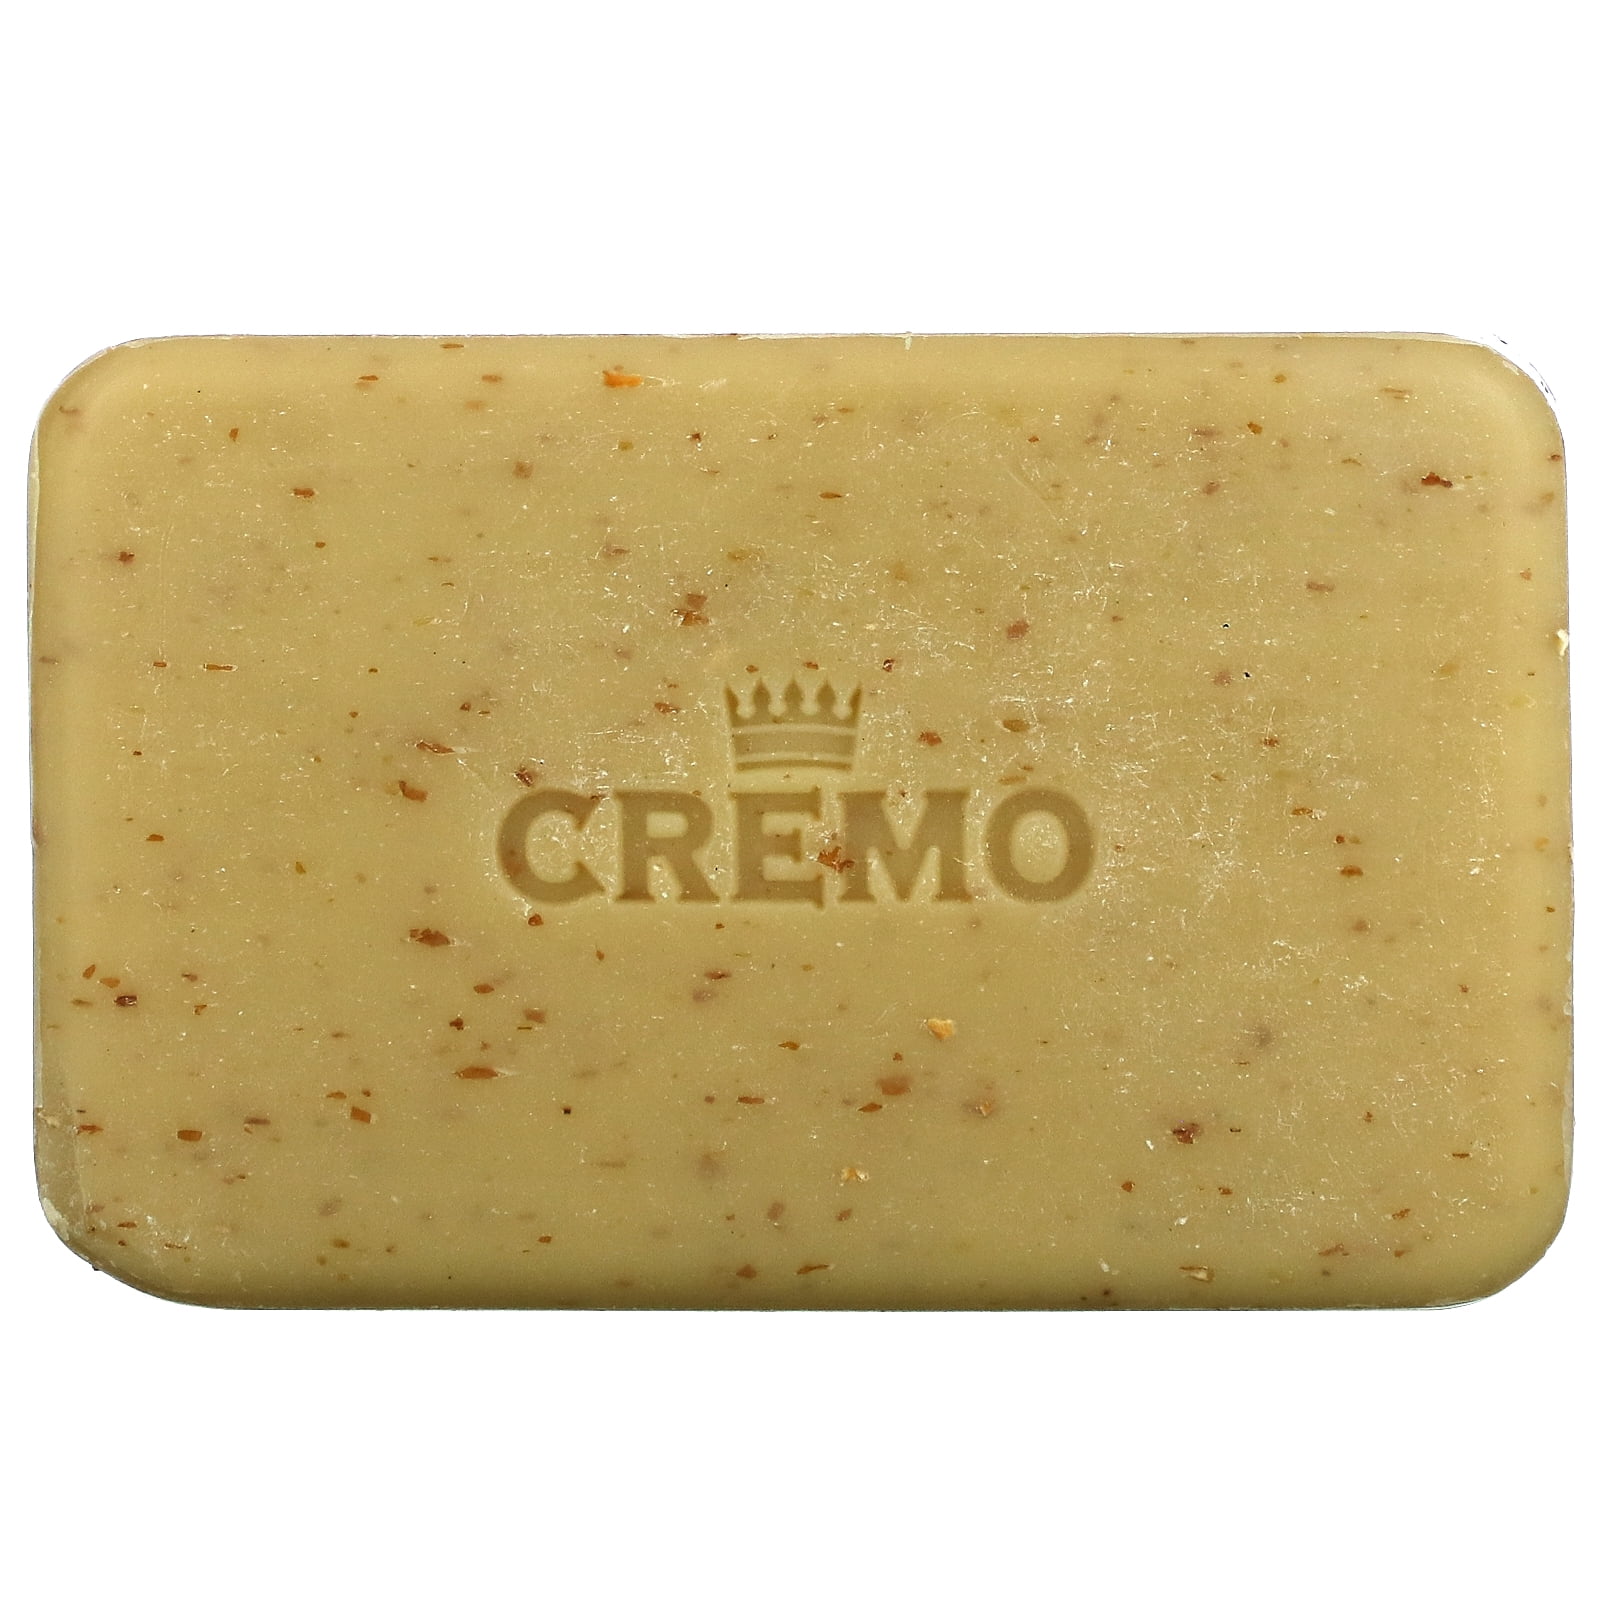  Cremo Exfoliating Body Bars Distiller's Blend (Reserve  Collection) - A Combination of Lava Rock and Oat Kernel Gently Polishes  While Shea Butter Leaves Your Skin Feeling Smooth & Healthy (Pack